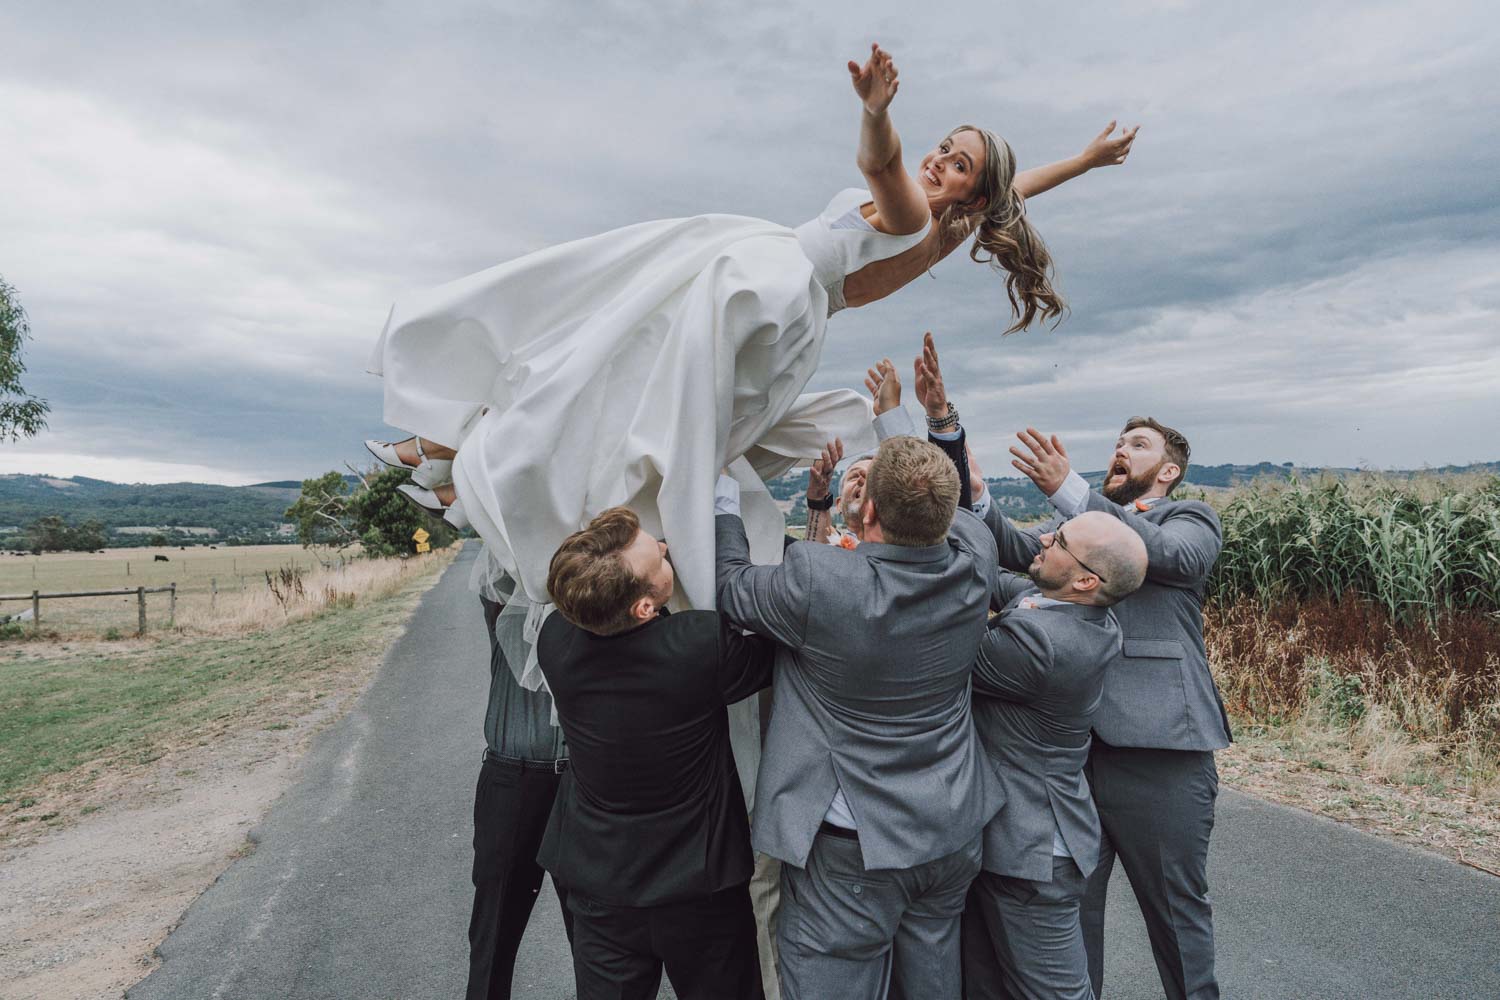 Bride joyfully being tossed into the air by groomsmen on a rural road near Melbourne, a lively moment captured during a wedding photoshoot in Melbourne.